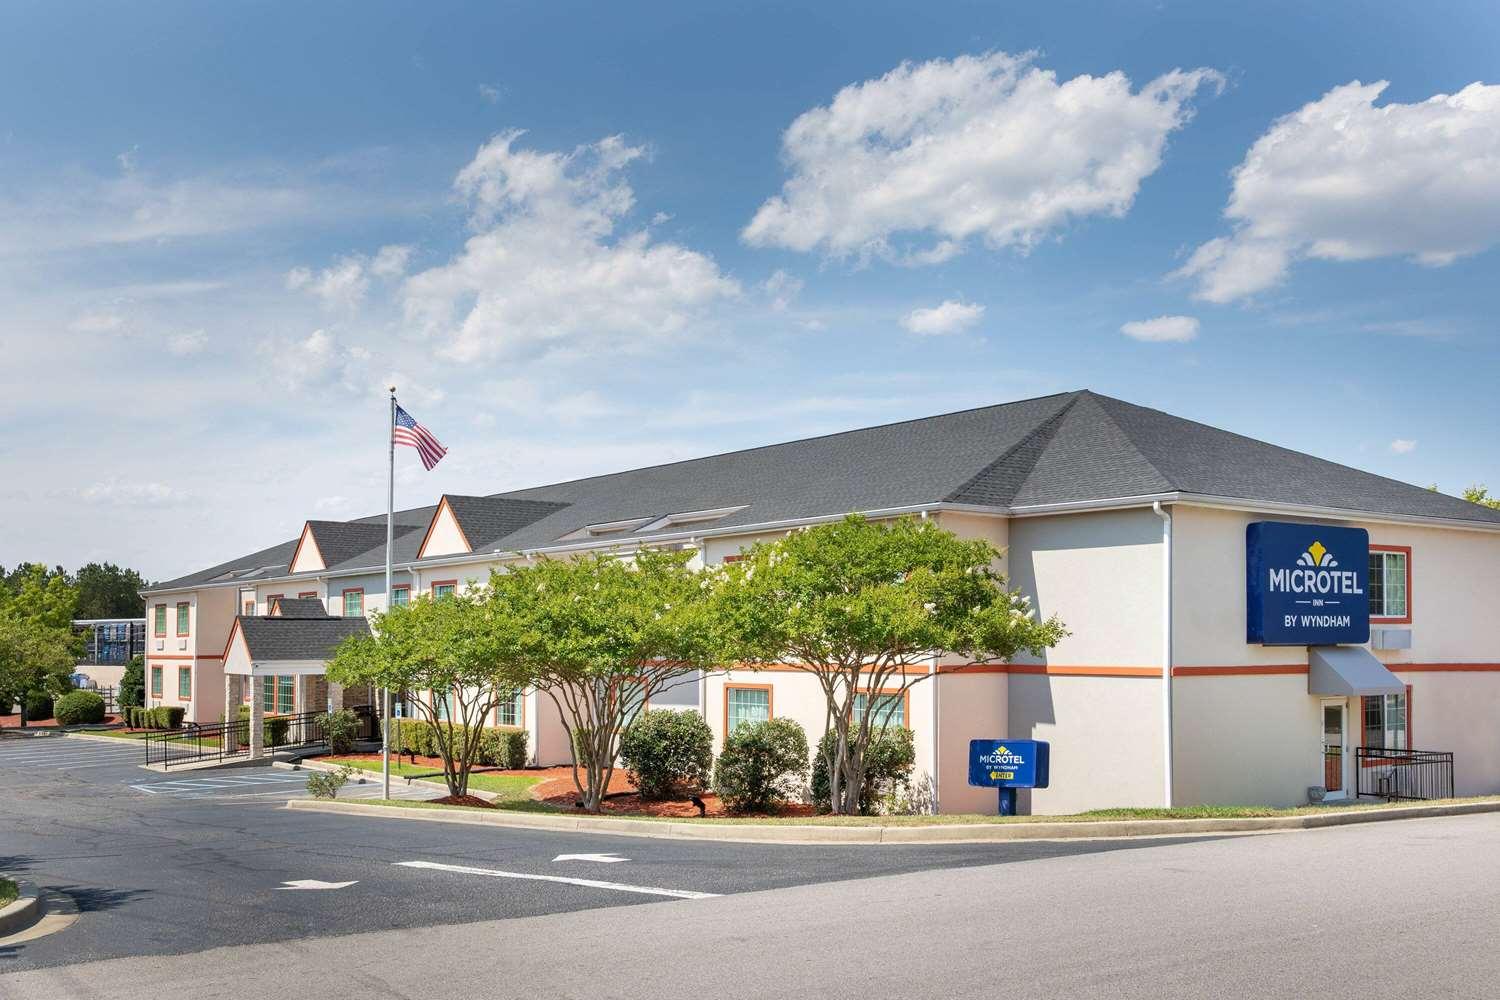 Microtel Inn & Suites by Wyndham Columbia Two Notch Rd Area in Columbia, SC